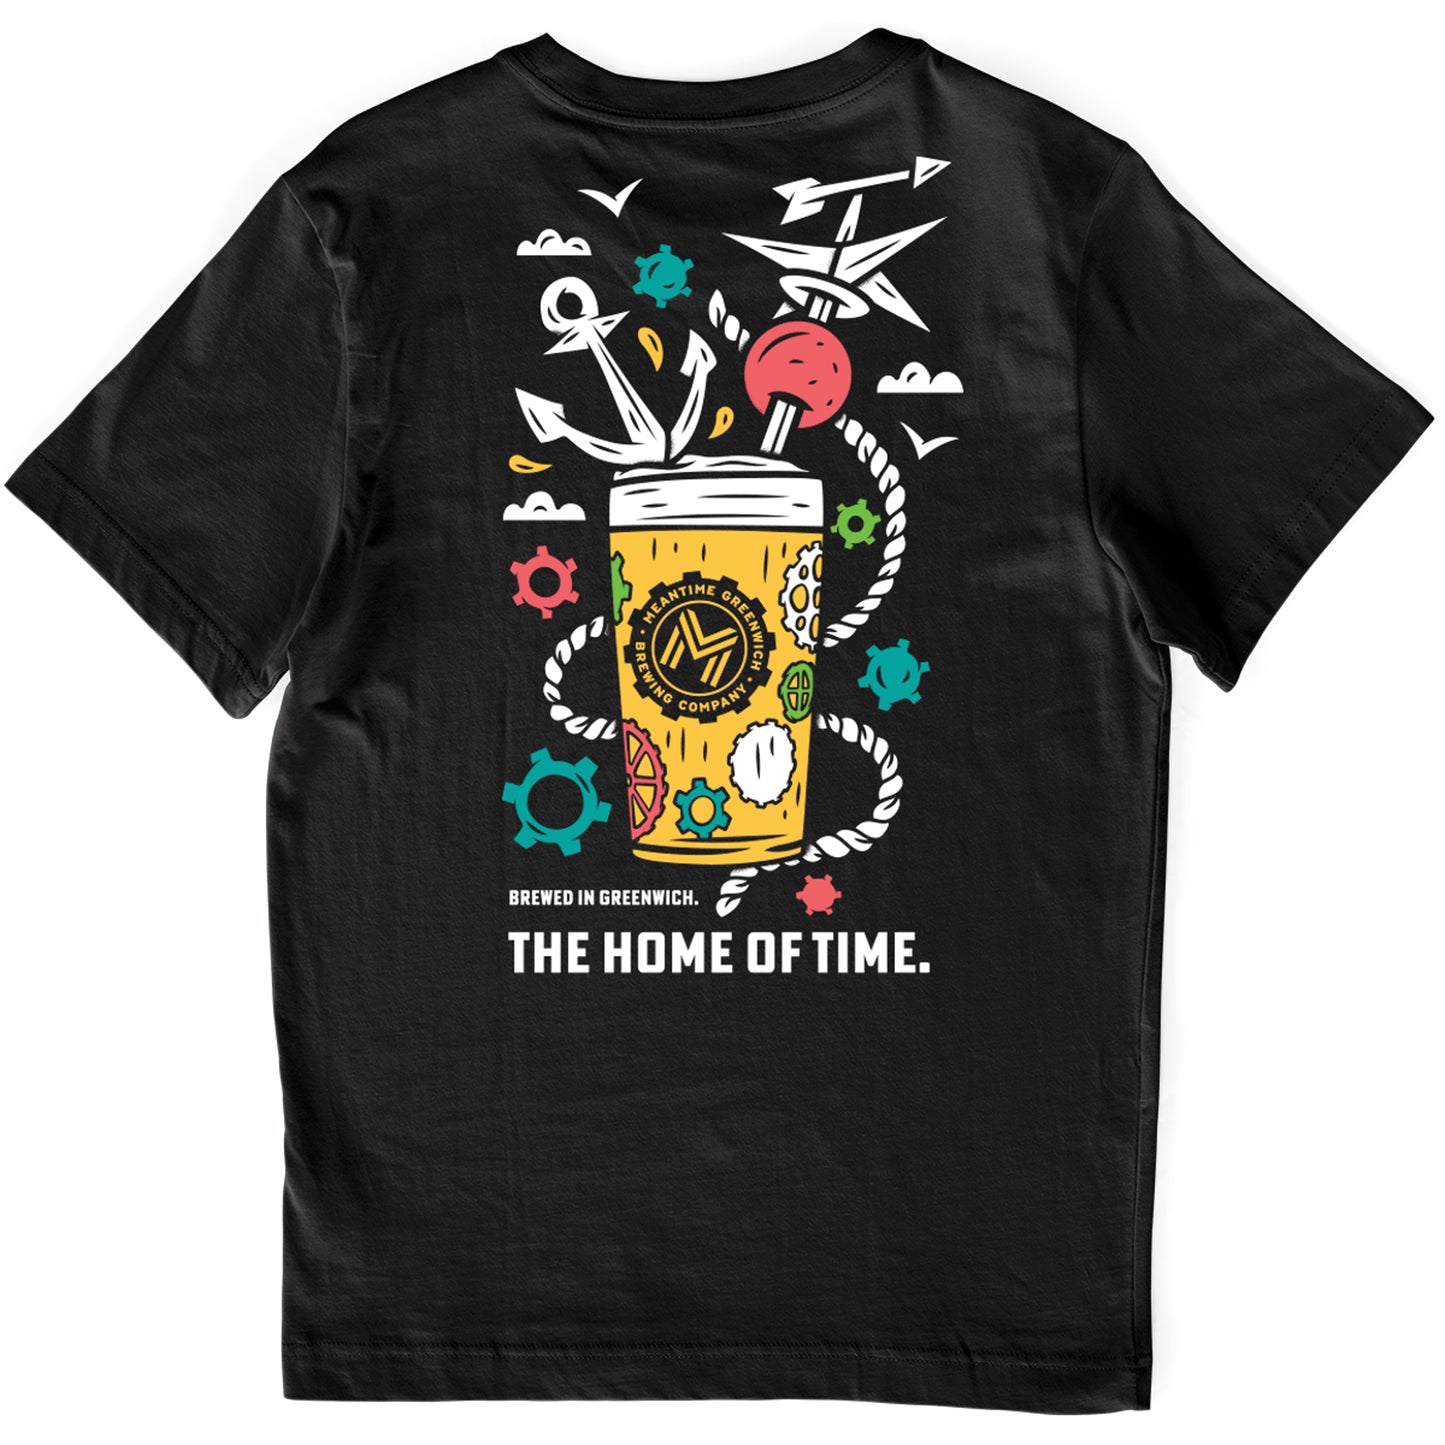 Meantime The Home of Time T-Shirt